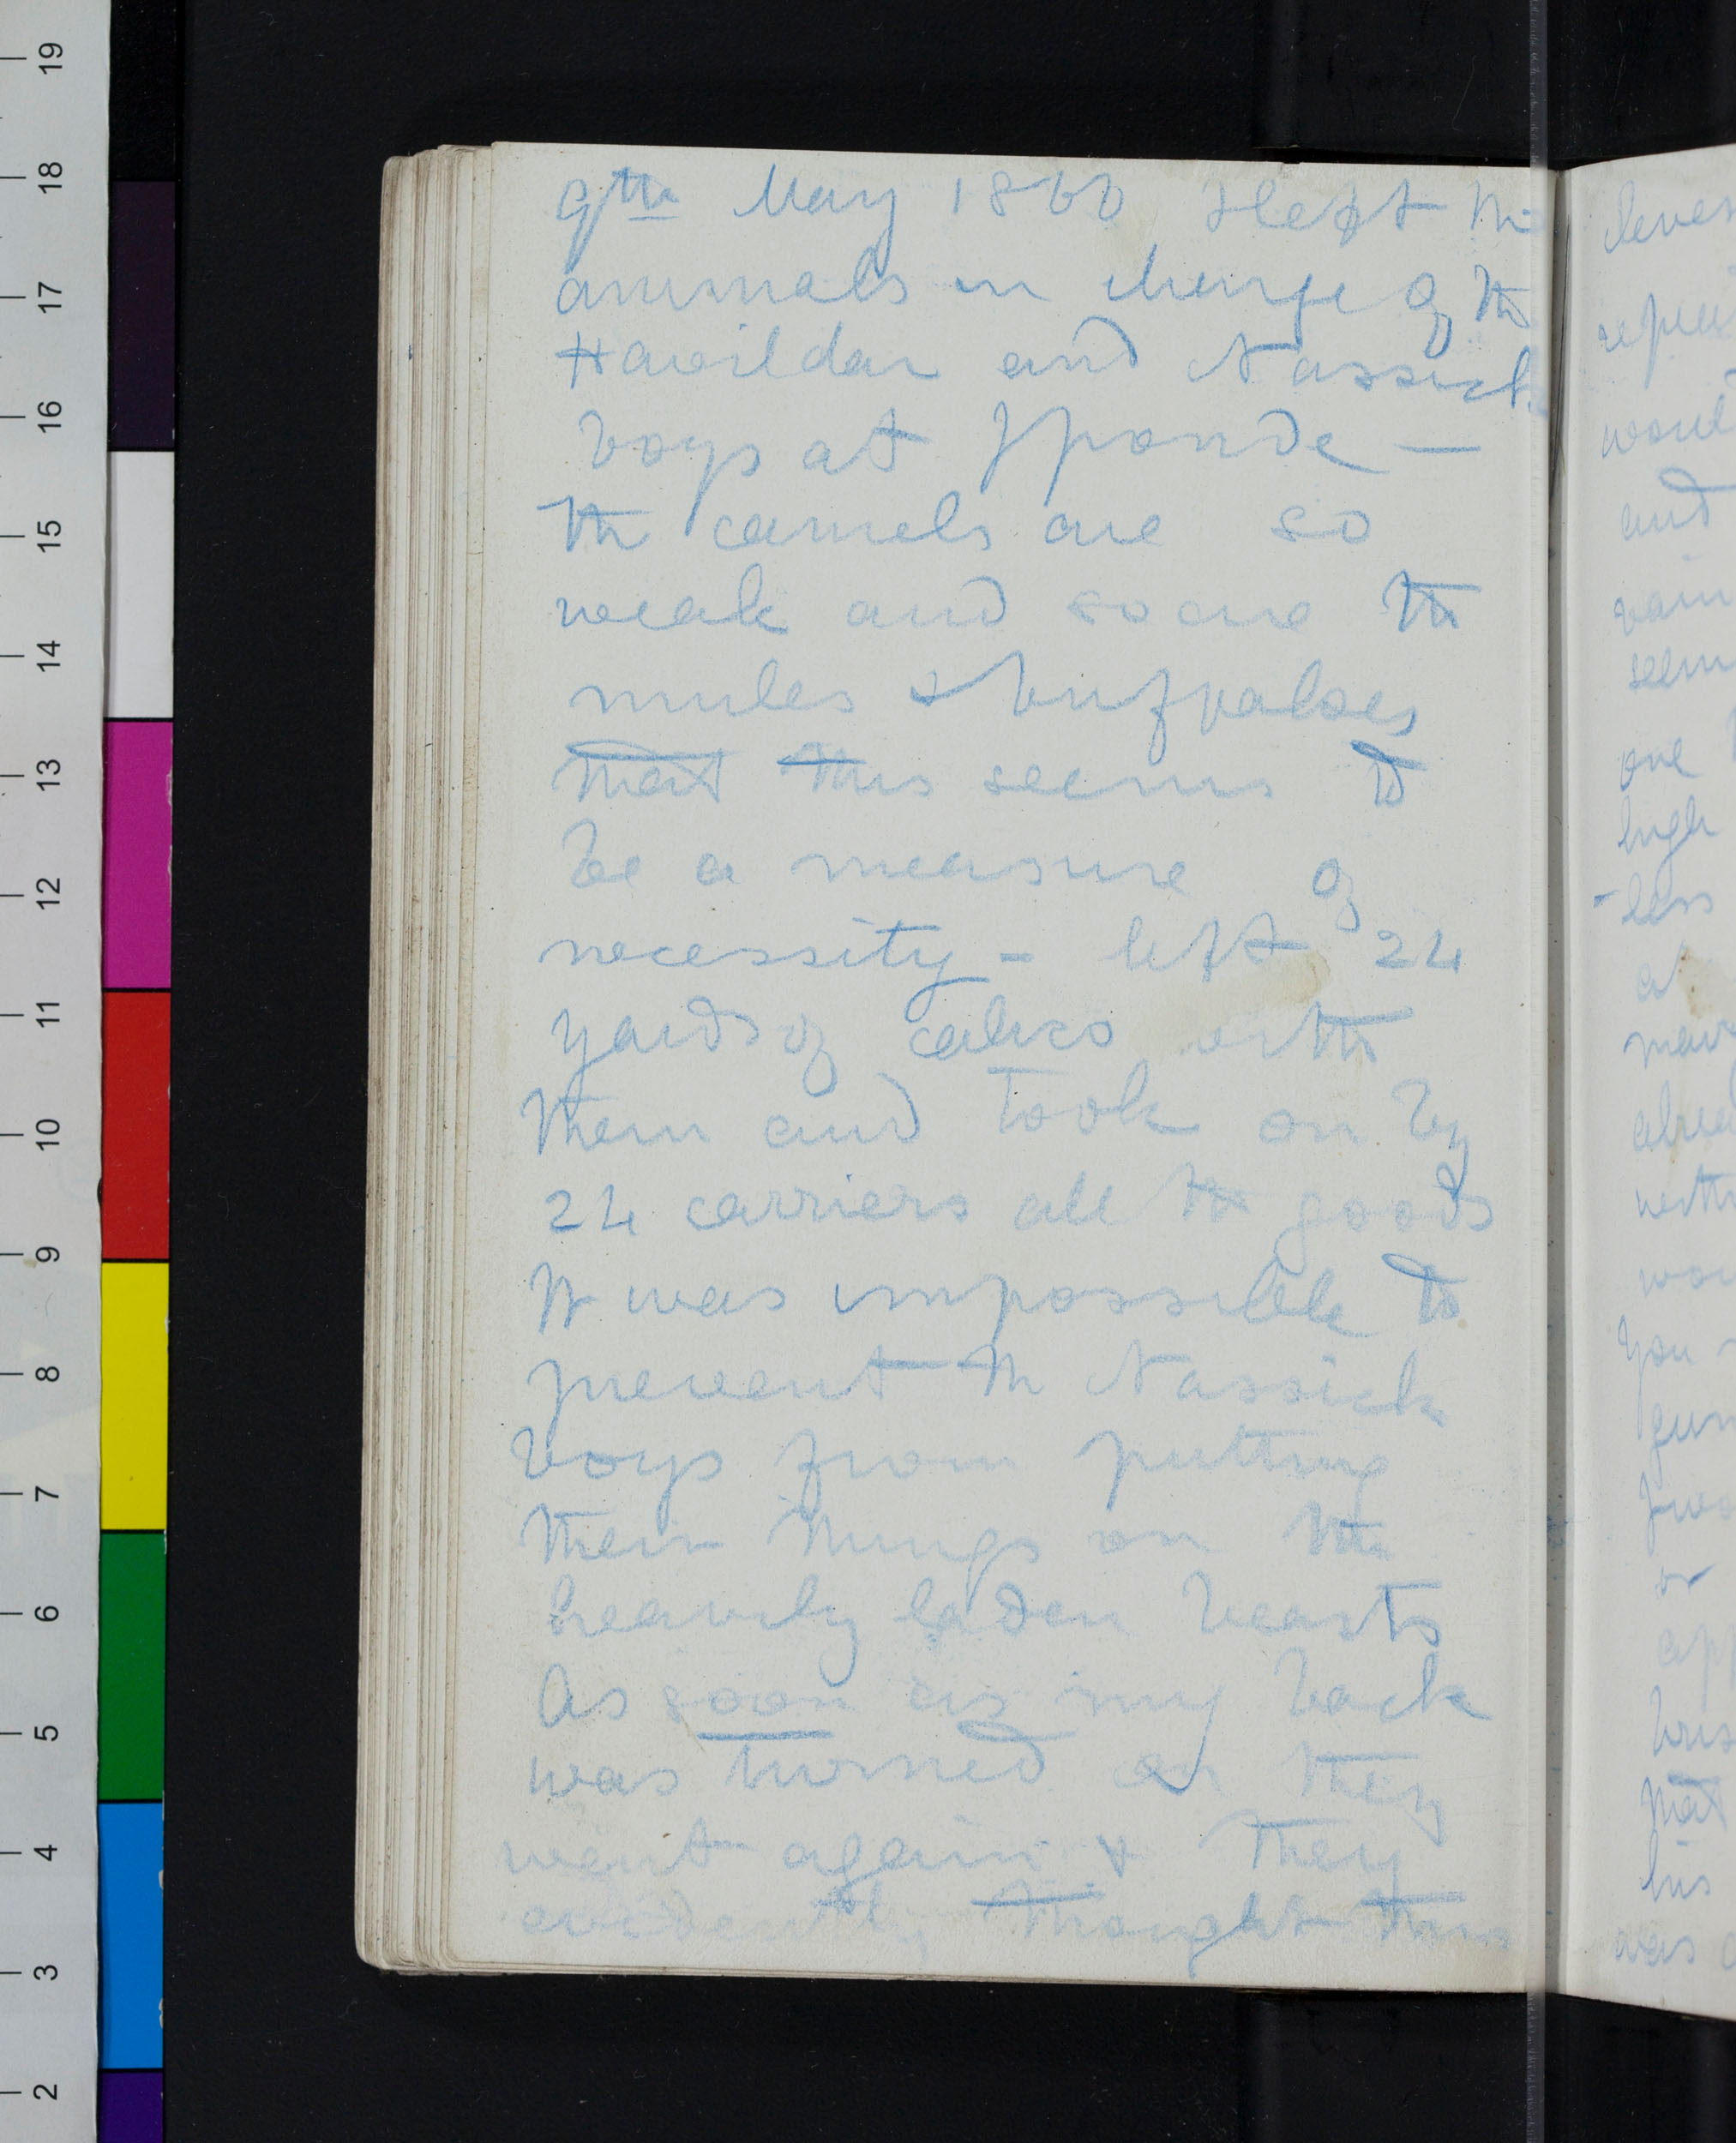 An image of a page of Field Diary II (Livingstone 1866a:[88]). Copyright David Livingstone Centre. Creative Commons Attribution-NonCommercial 3.0 Unported (https://creativecommons.org/licenses/by-nc/3.0/).